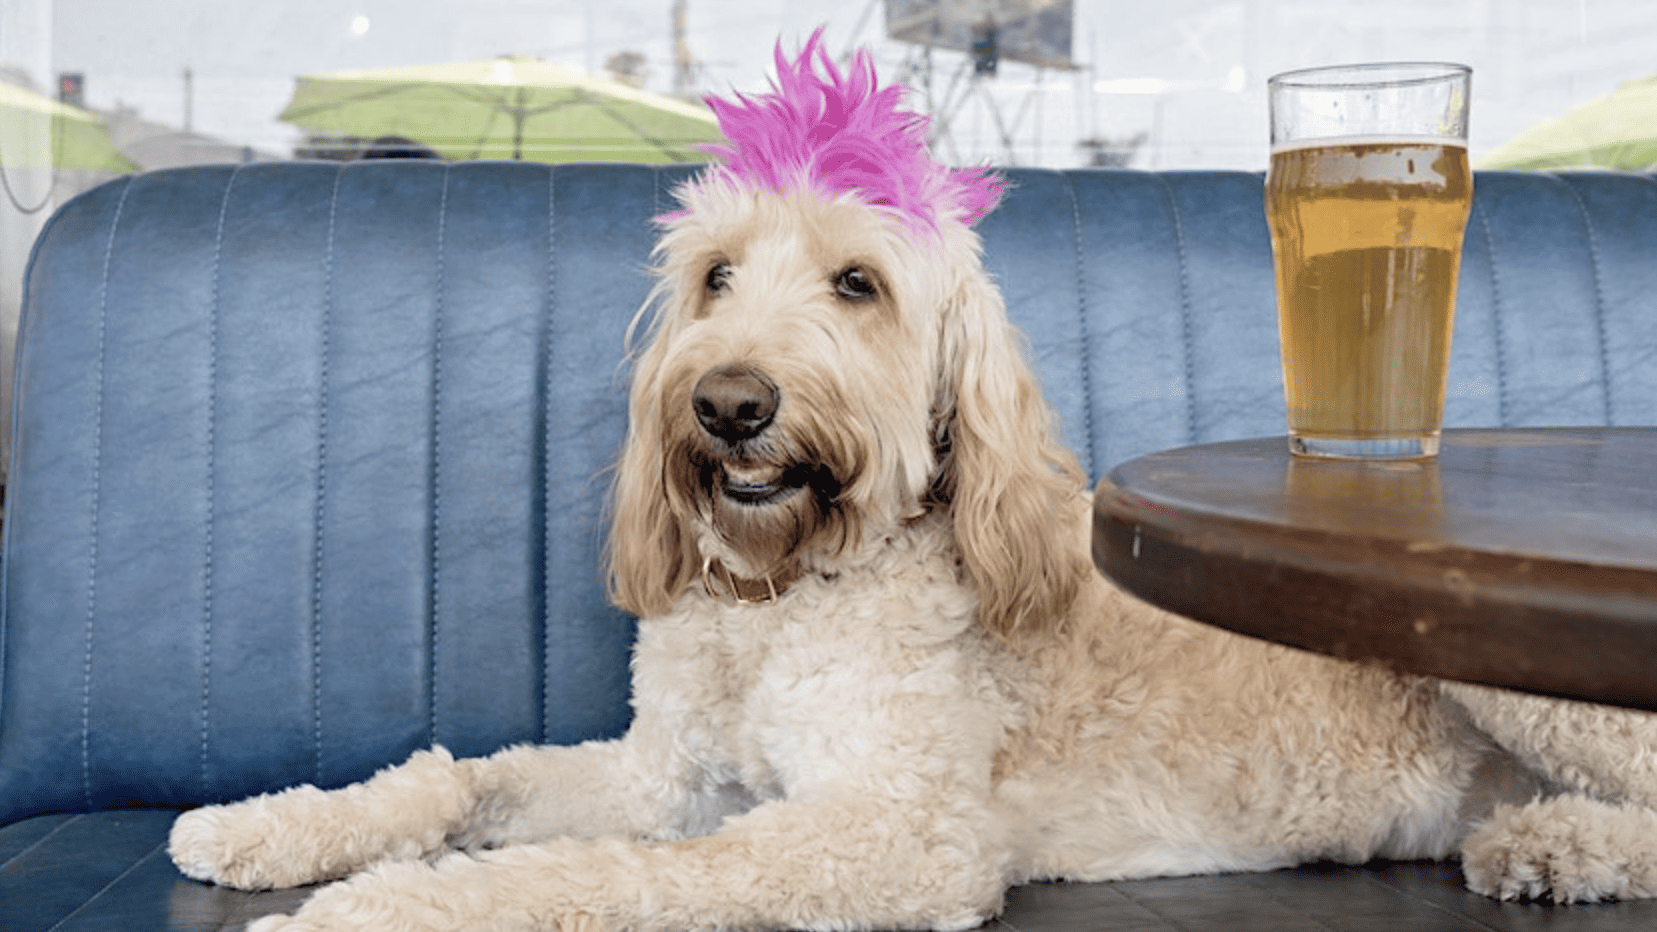 A dog with a pink hat sitting at a table with a glass of beer.